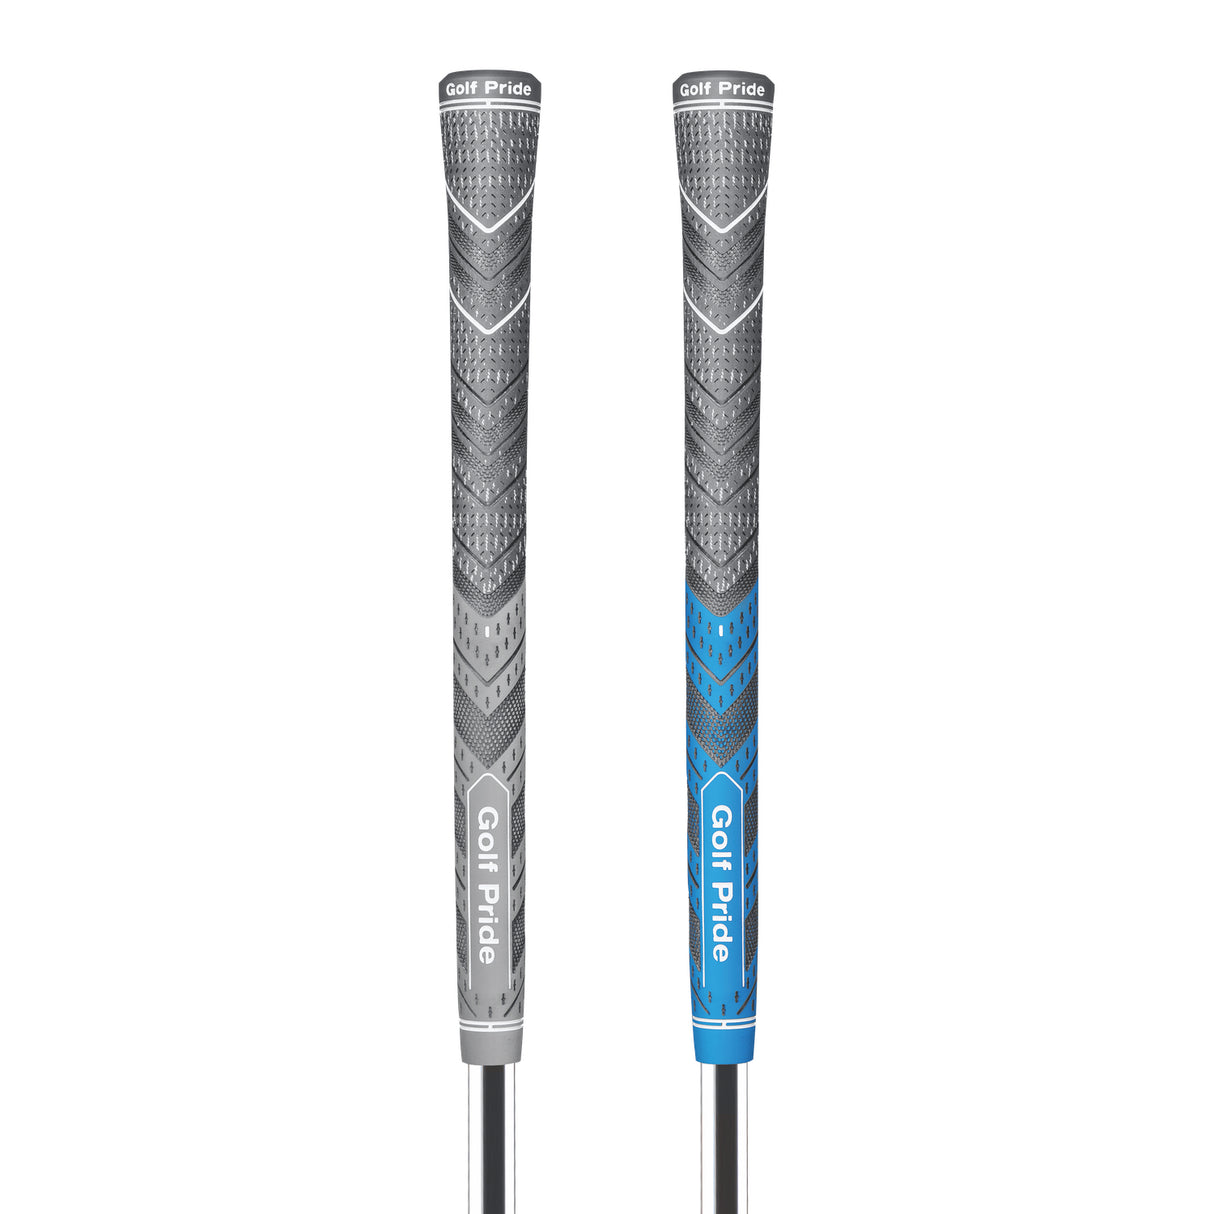 Golf Pride New Decade MultiCompound ALIGN Ribbed Golf Grips